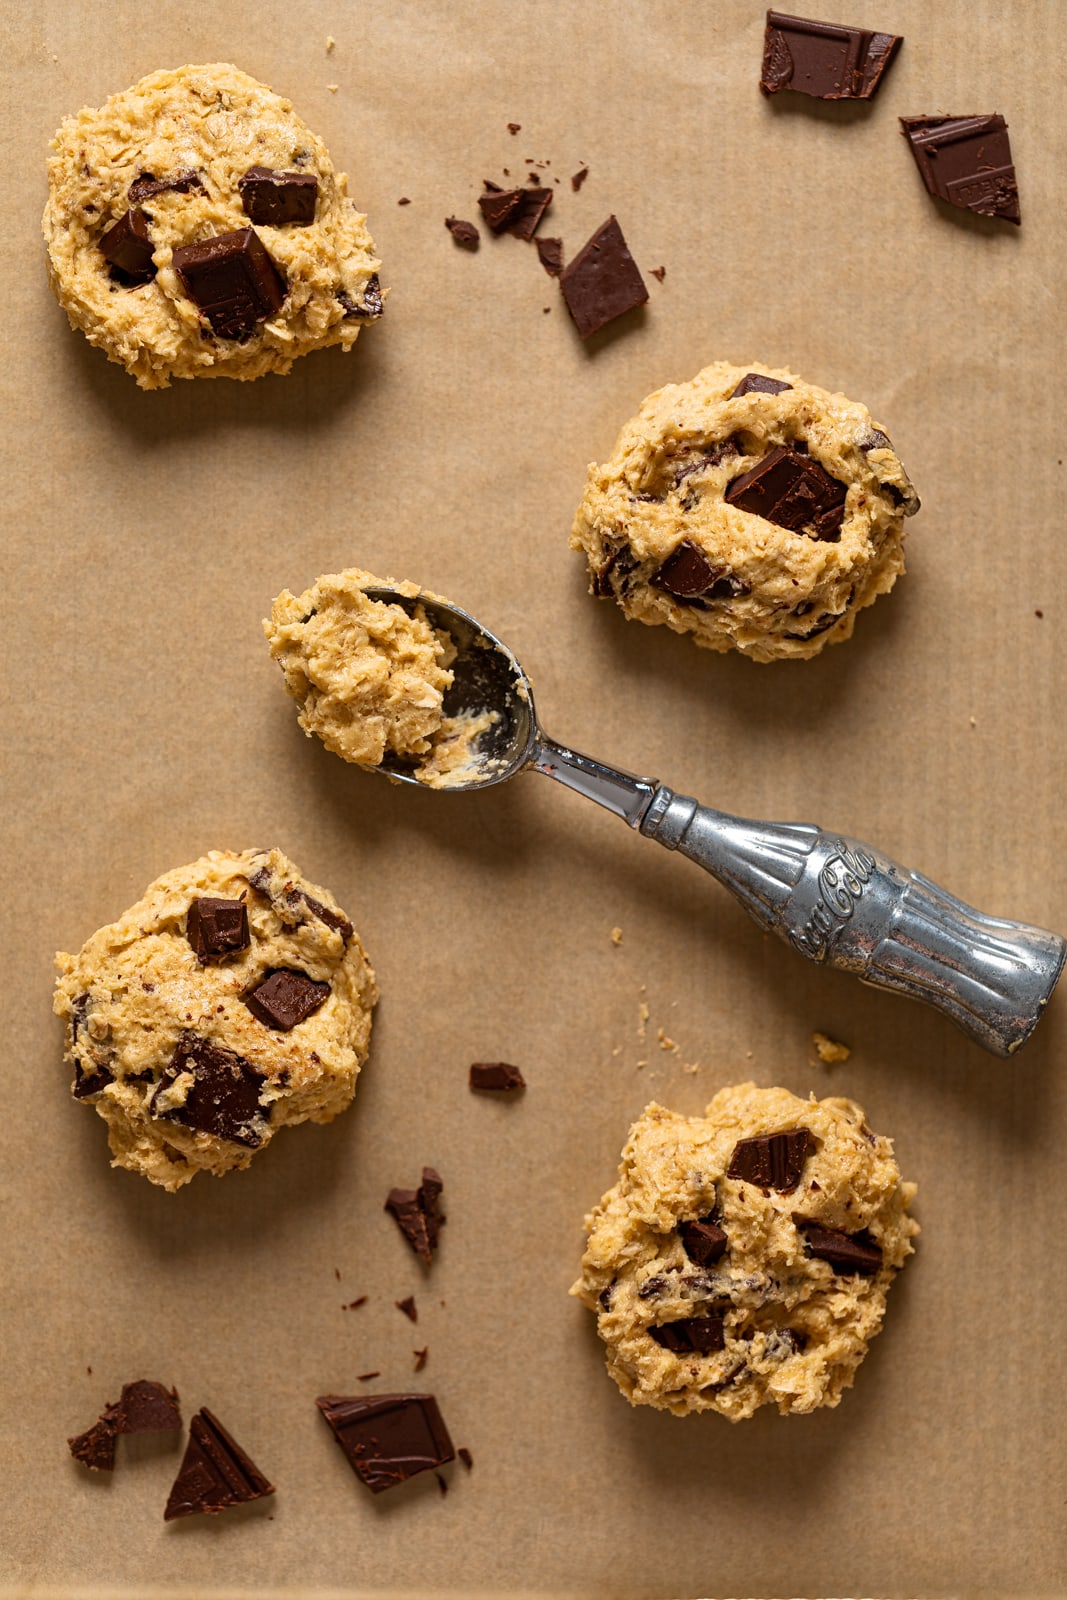 Balls of Oatmeal Chocolate Chip Cookie dough on parchment paper